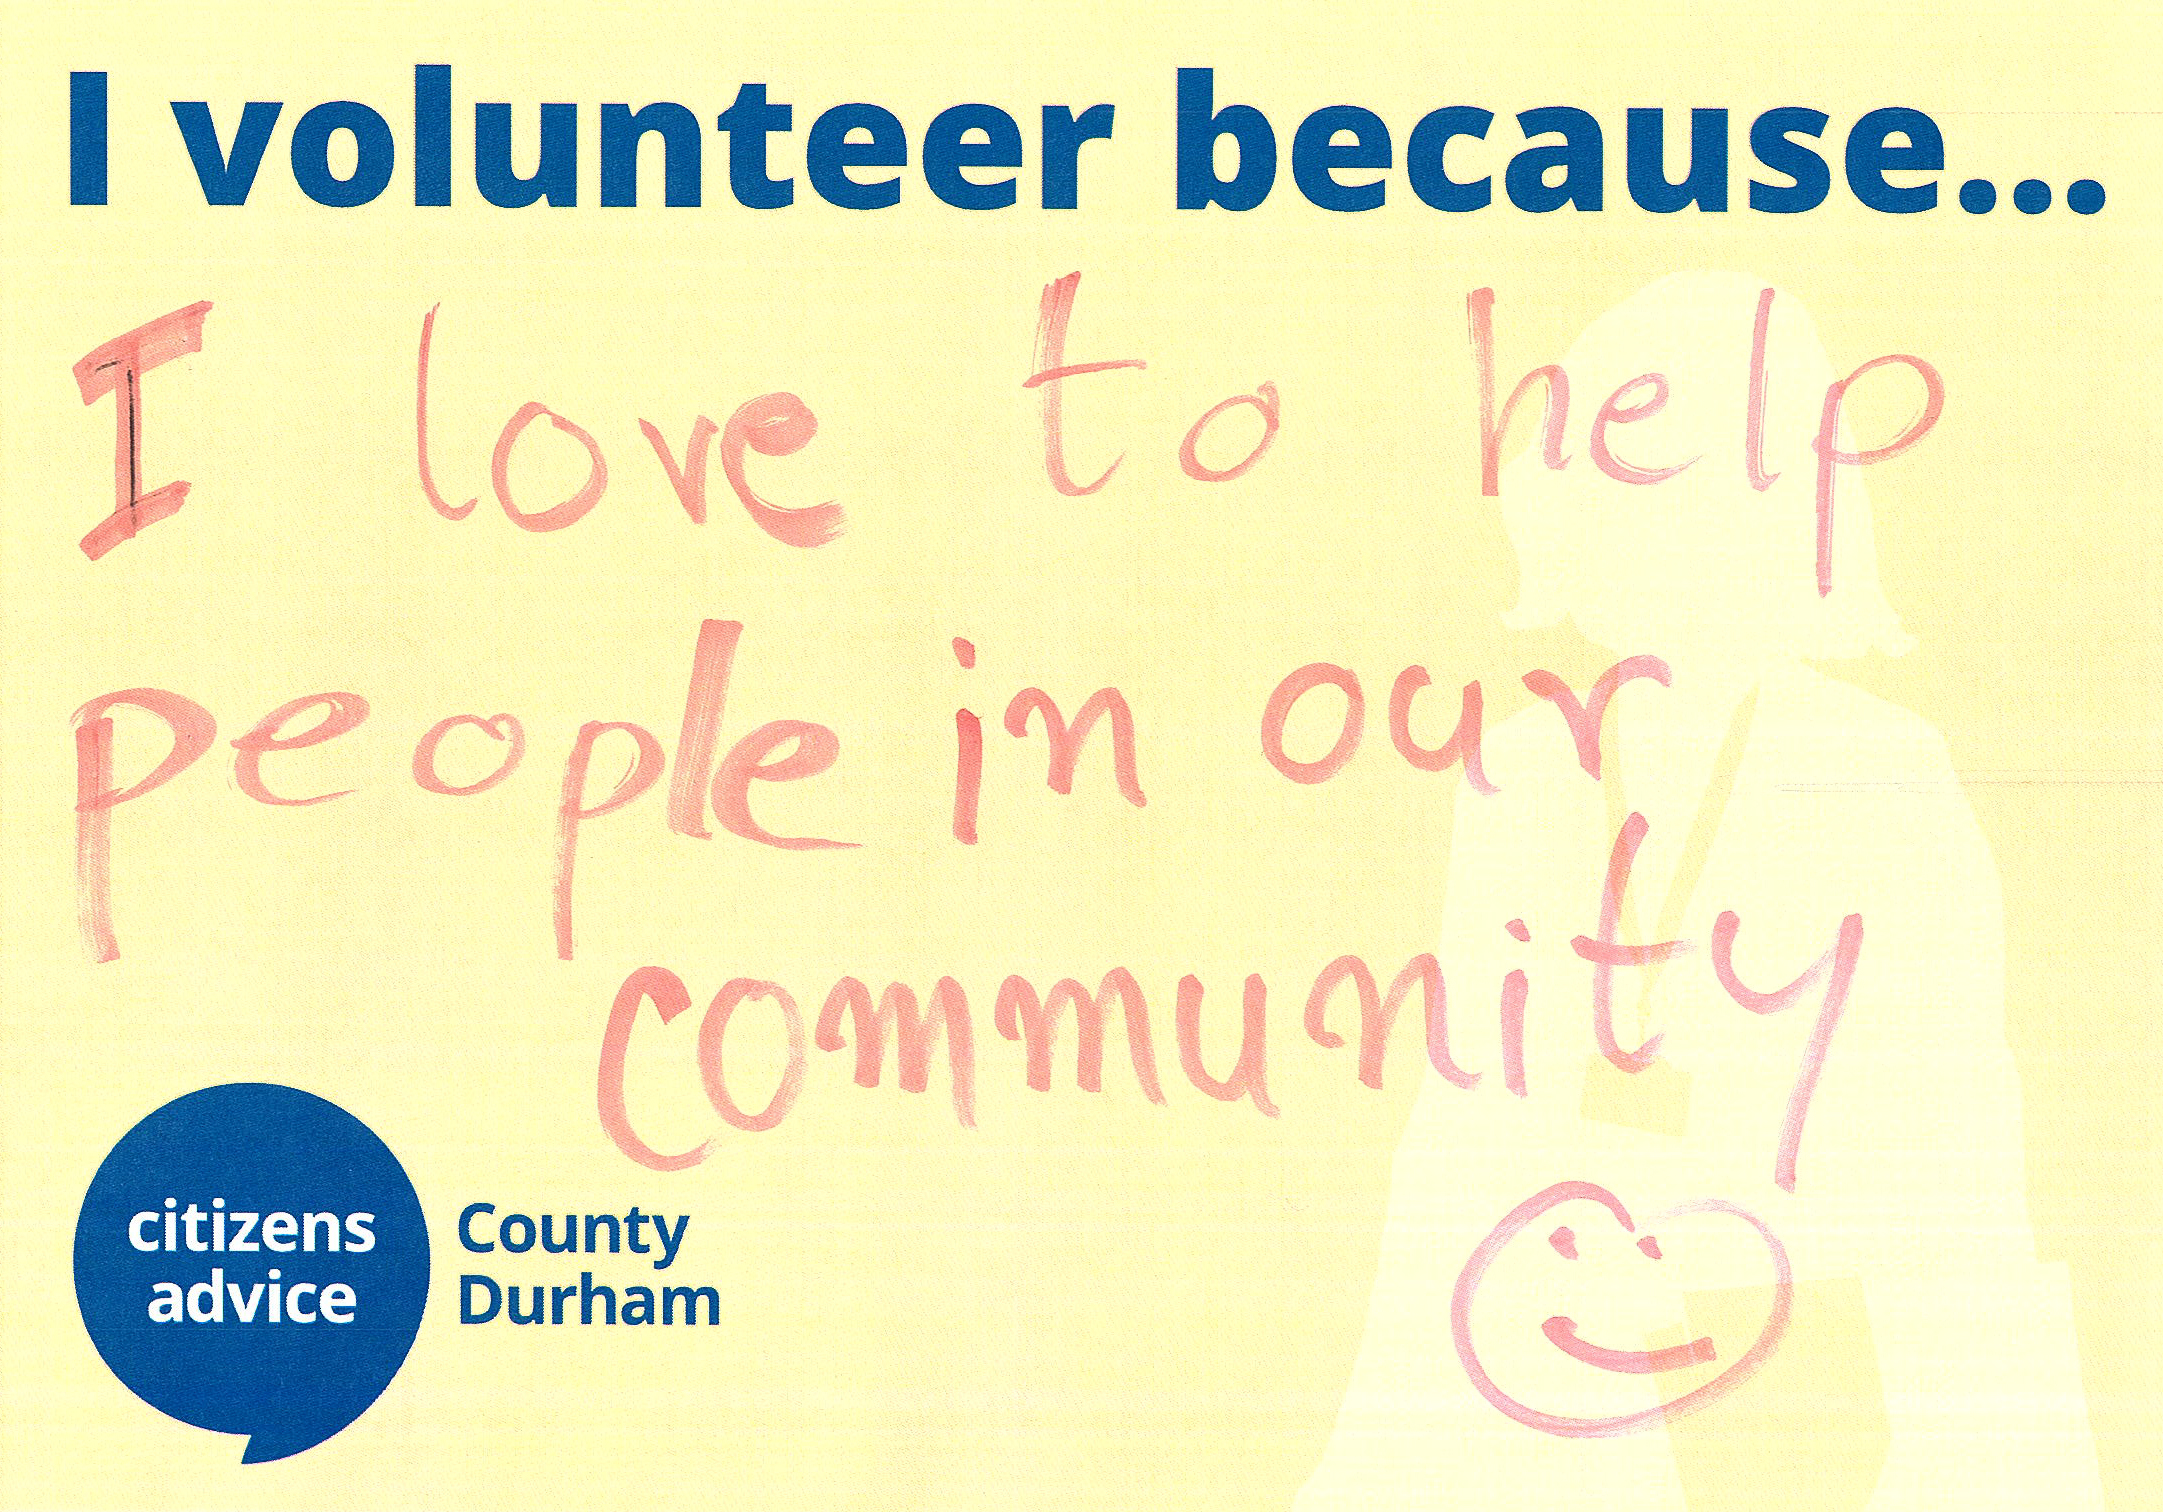 Students Apply now to become a volunteer with Citizens Advice County Durham